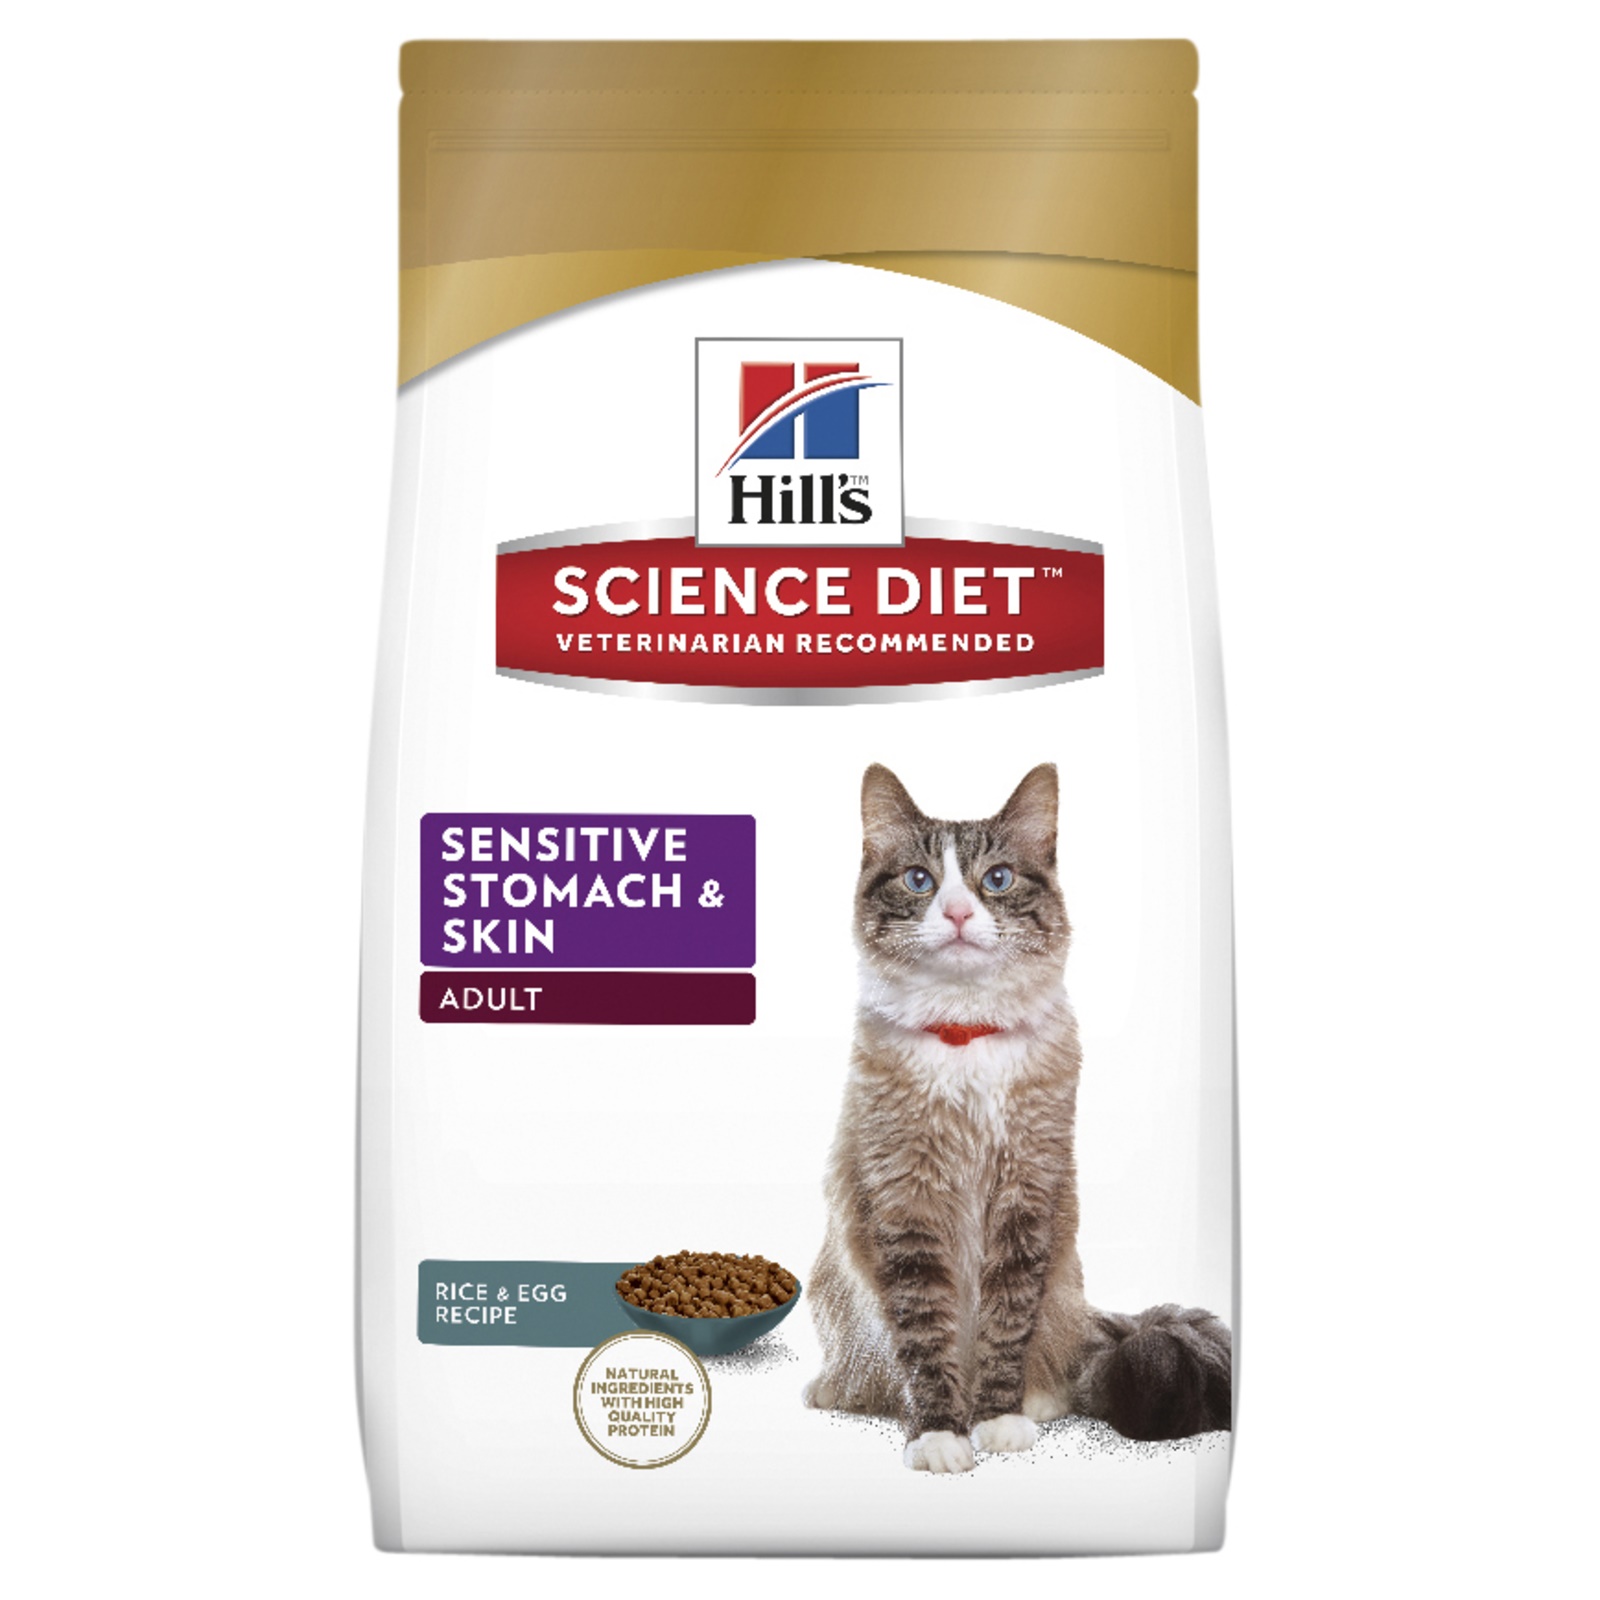 Hill's® Science Diet® Adult Sensitive Stomach & Skin cat food